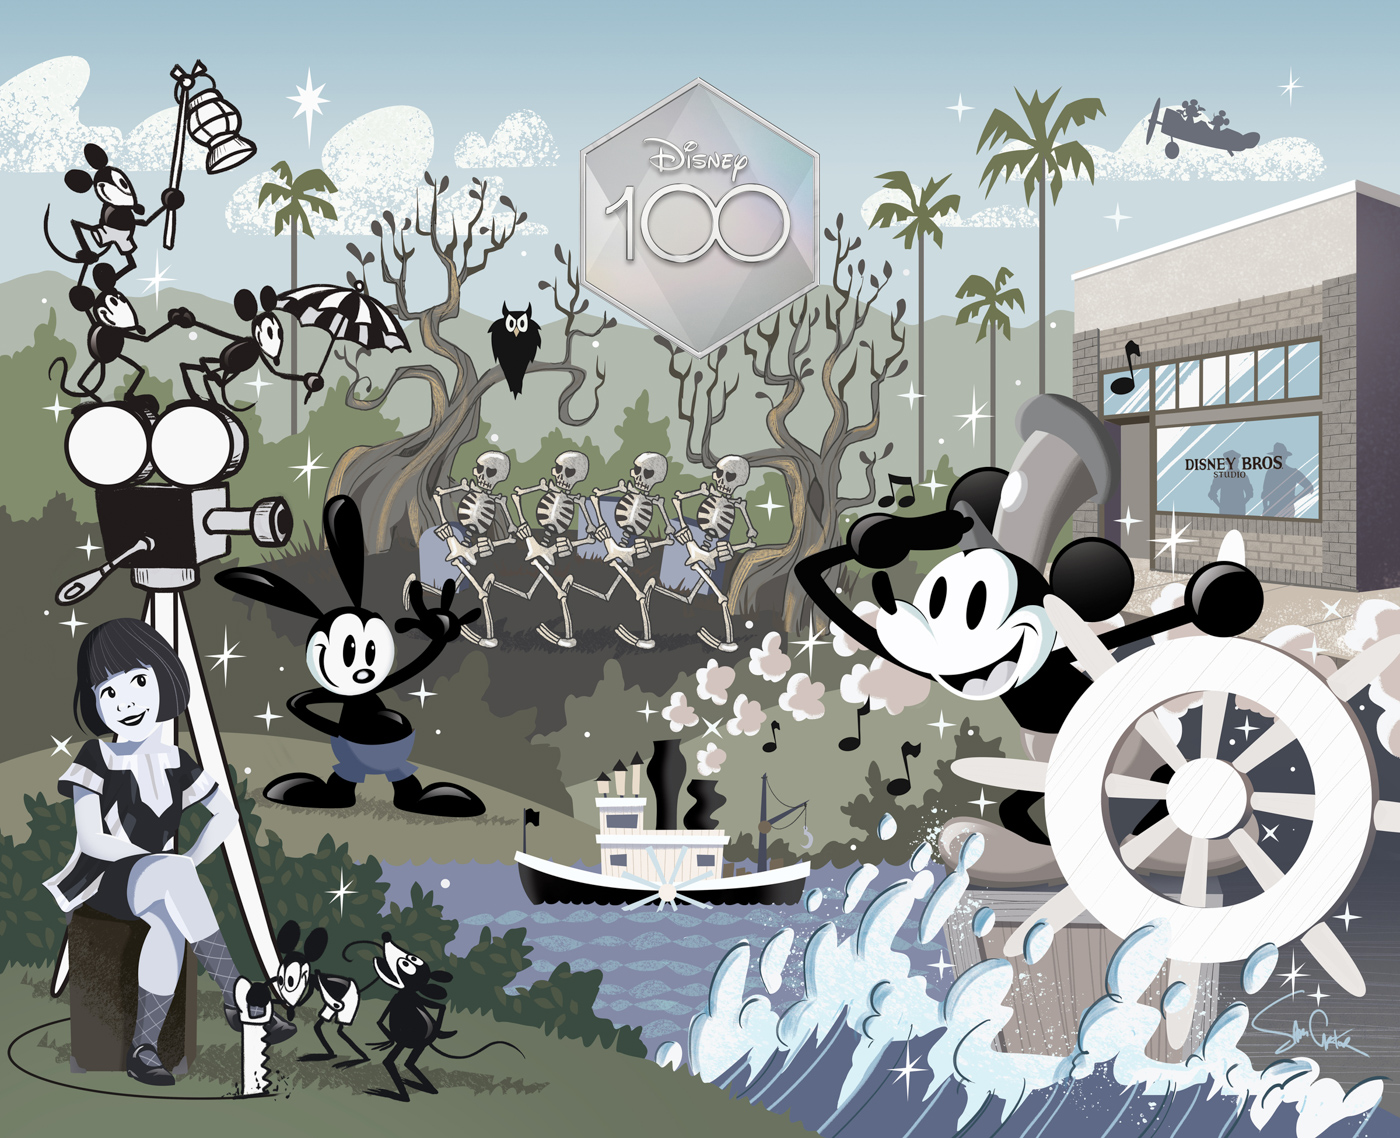 Illustration highlighting career milestones of Disney’s first 10 years, including Steamboat Willie, The Skeleton Dance, and the Alice Comedies. The art is all black and white against an illustrated green, forest background. In the top center of the art is an iridescent, diamond-like logo for Disney100.